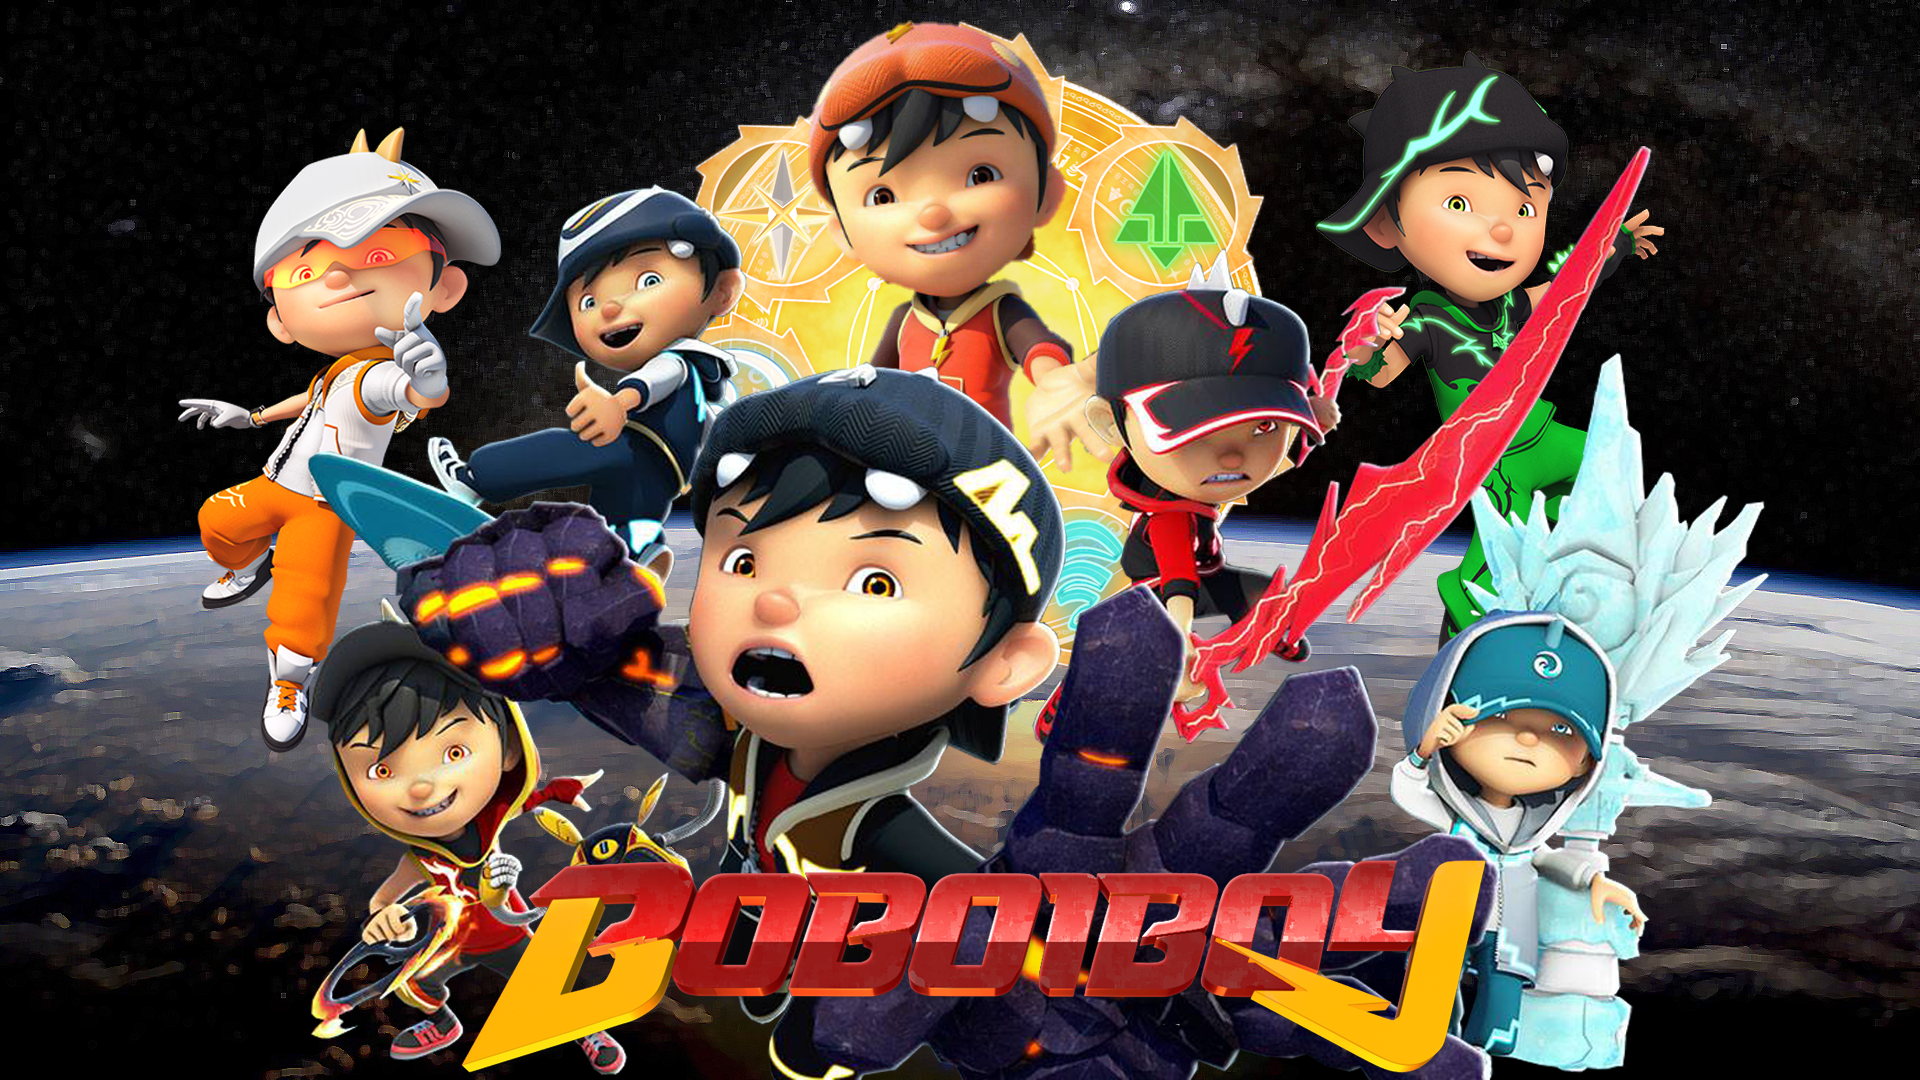 Image Wallpaper Lagipng BoBoiBoy Wiki FANDOM Powered By Wikia